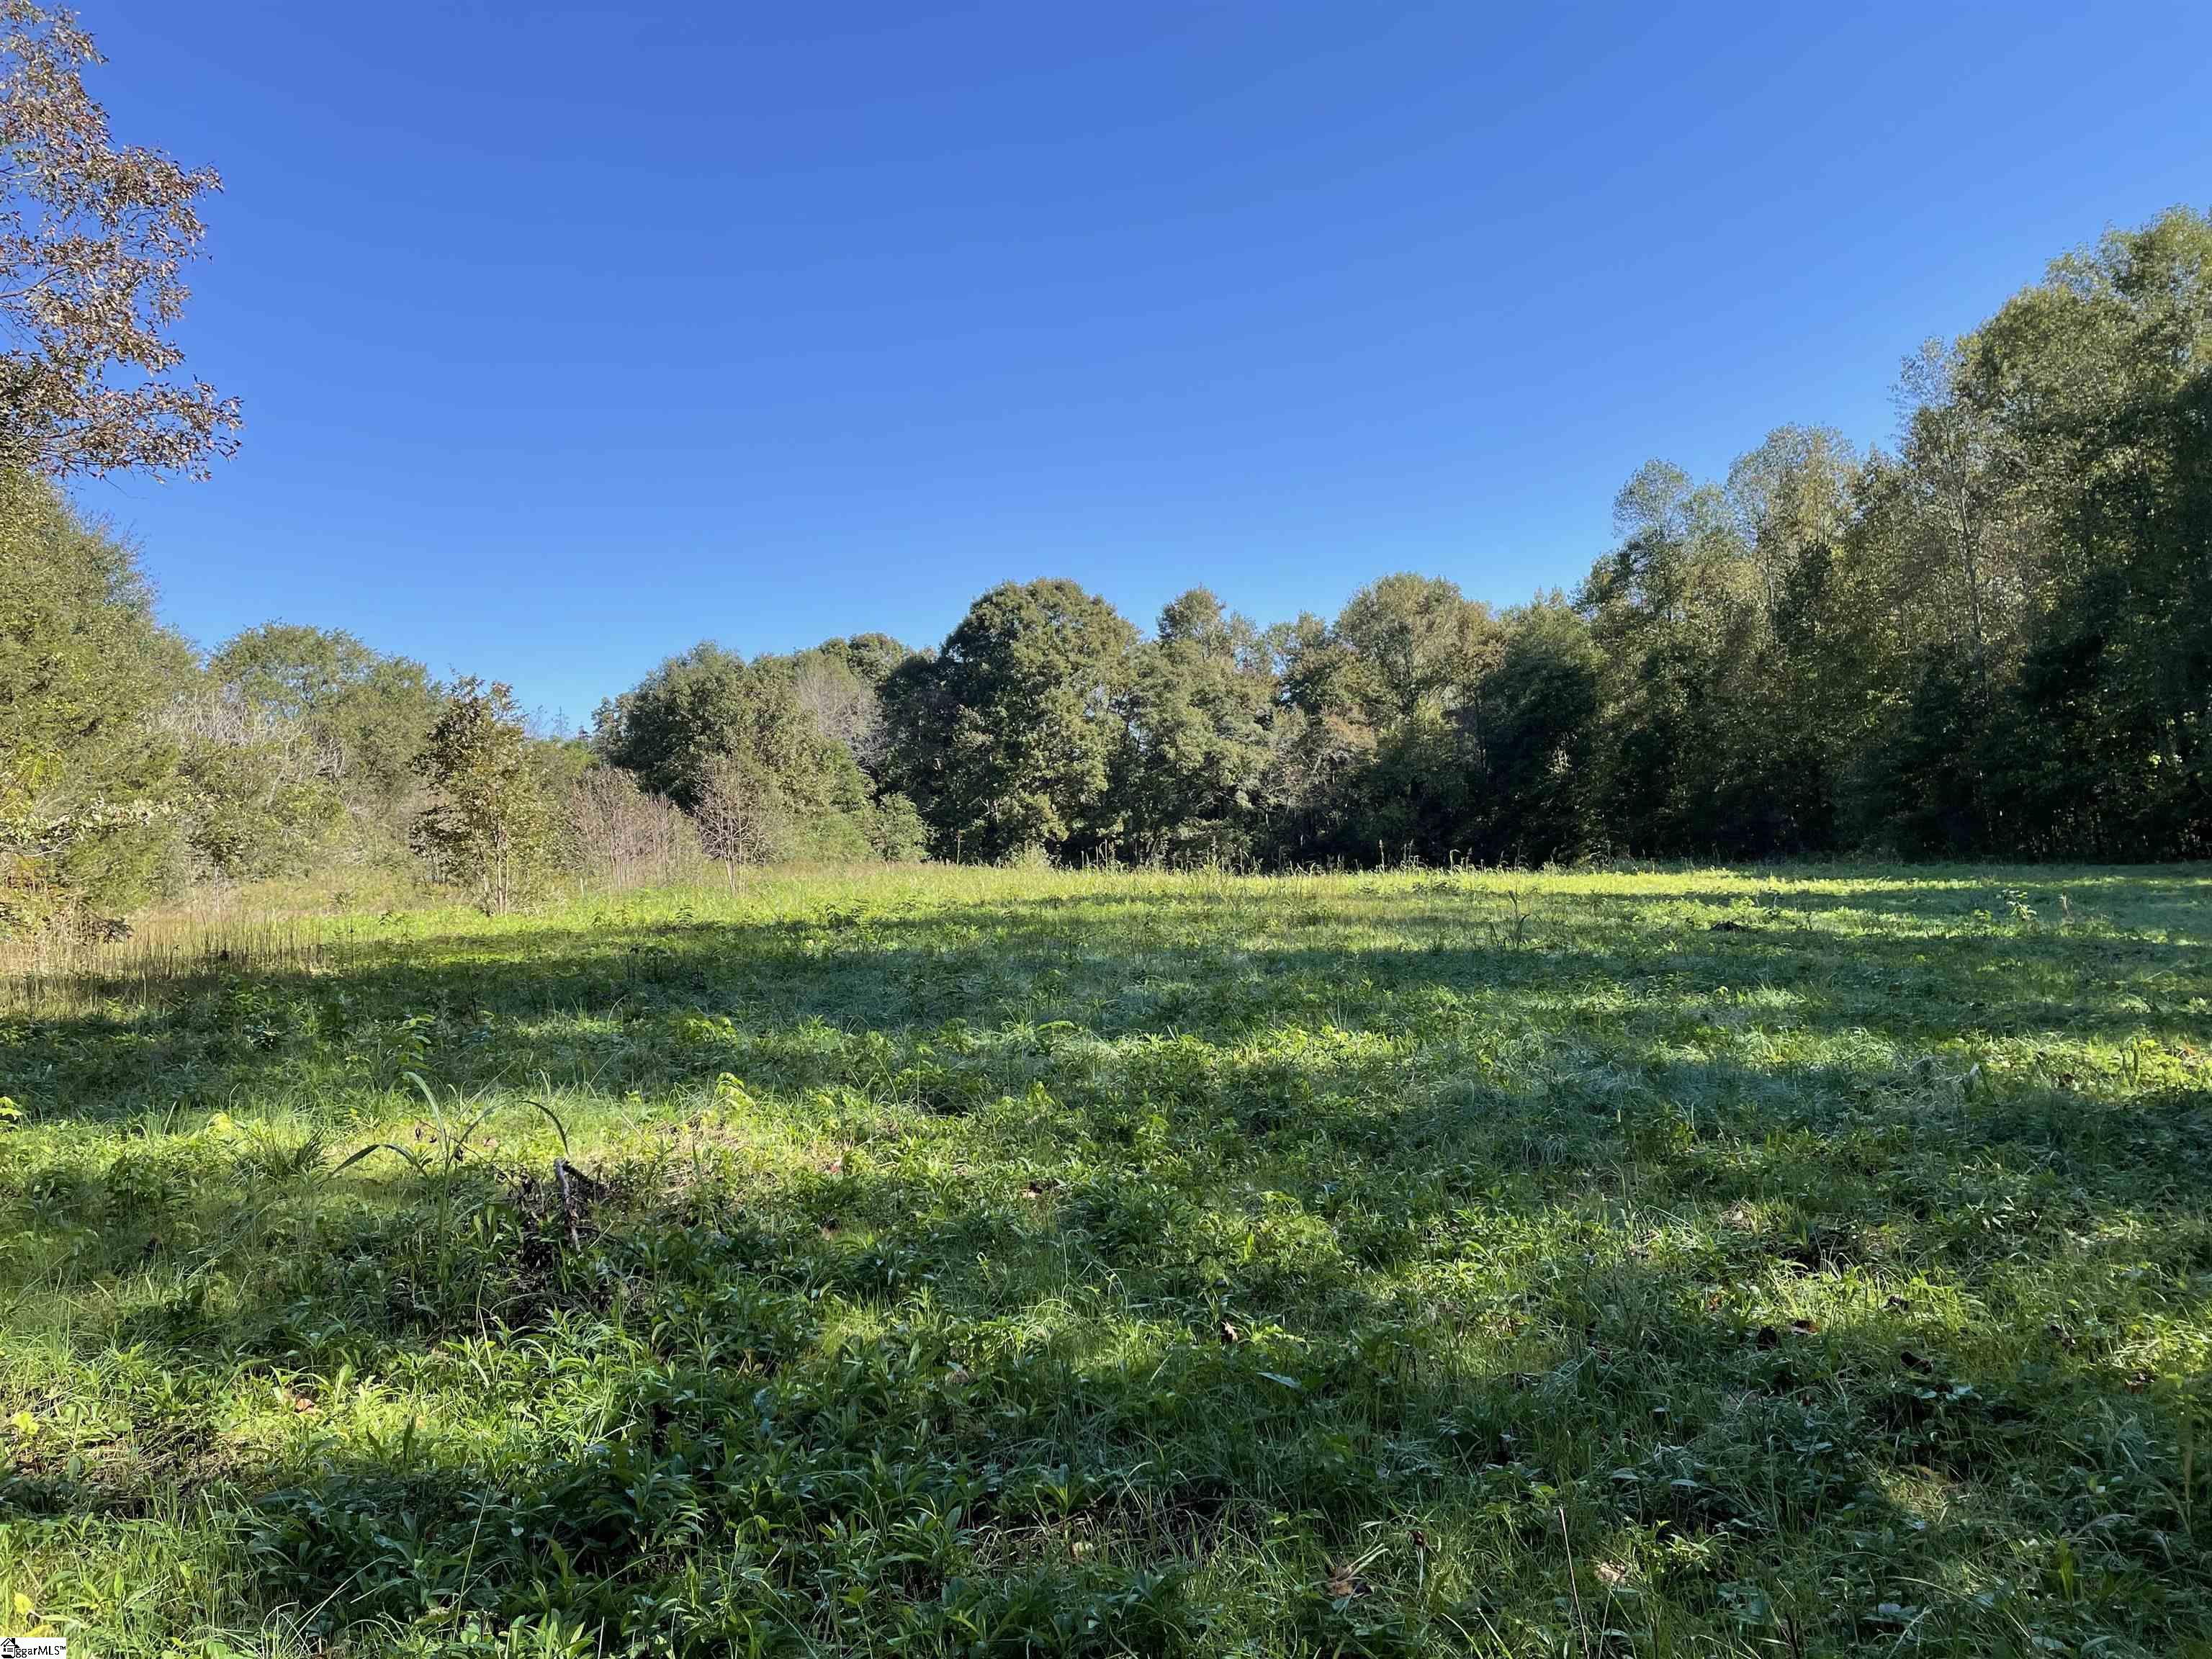 42 Unrestricted Acres with quick, easy, access to I-85, centrally located between Anderson and Greenville makes this the perfect location!  Property features, pond, pasture, mixed hardwoods and creek and is perfect for hunting, horses or farming.  Property has two wells, public water, natural gas and electric available for installation at road.  Anderson District One Schools.   Only 12-15 miles to Anderson, Easley or Greenville!   Easy to walk and see property, appointment required.